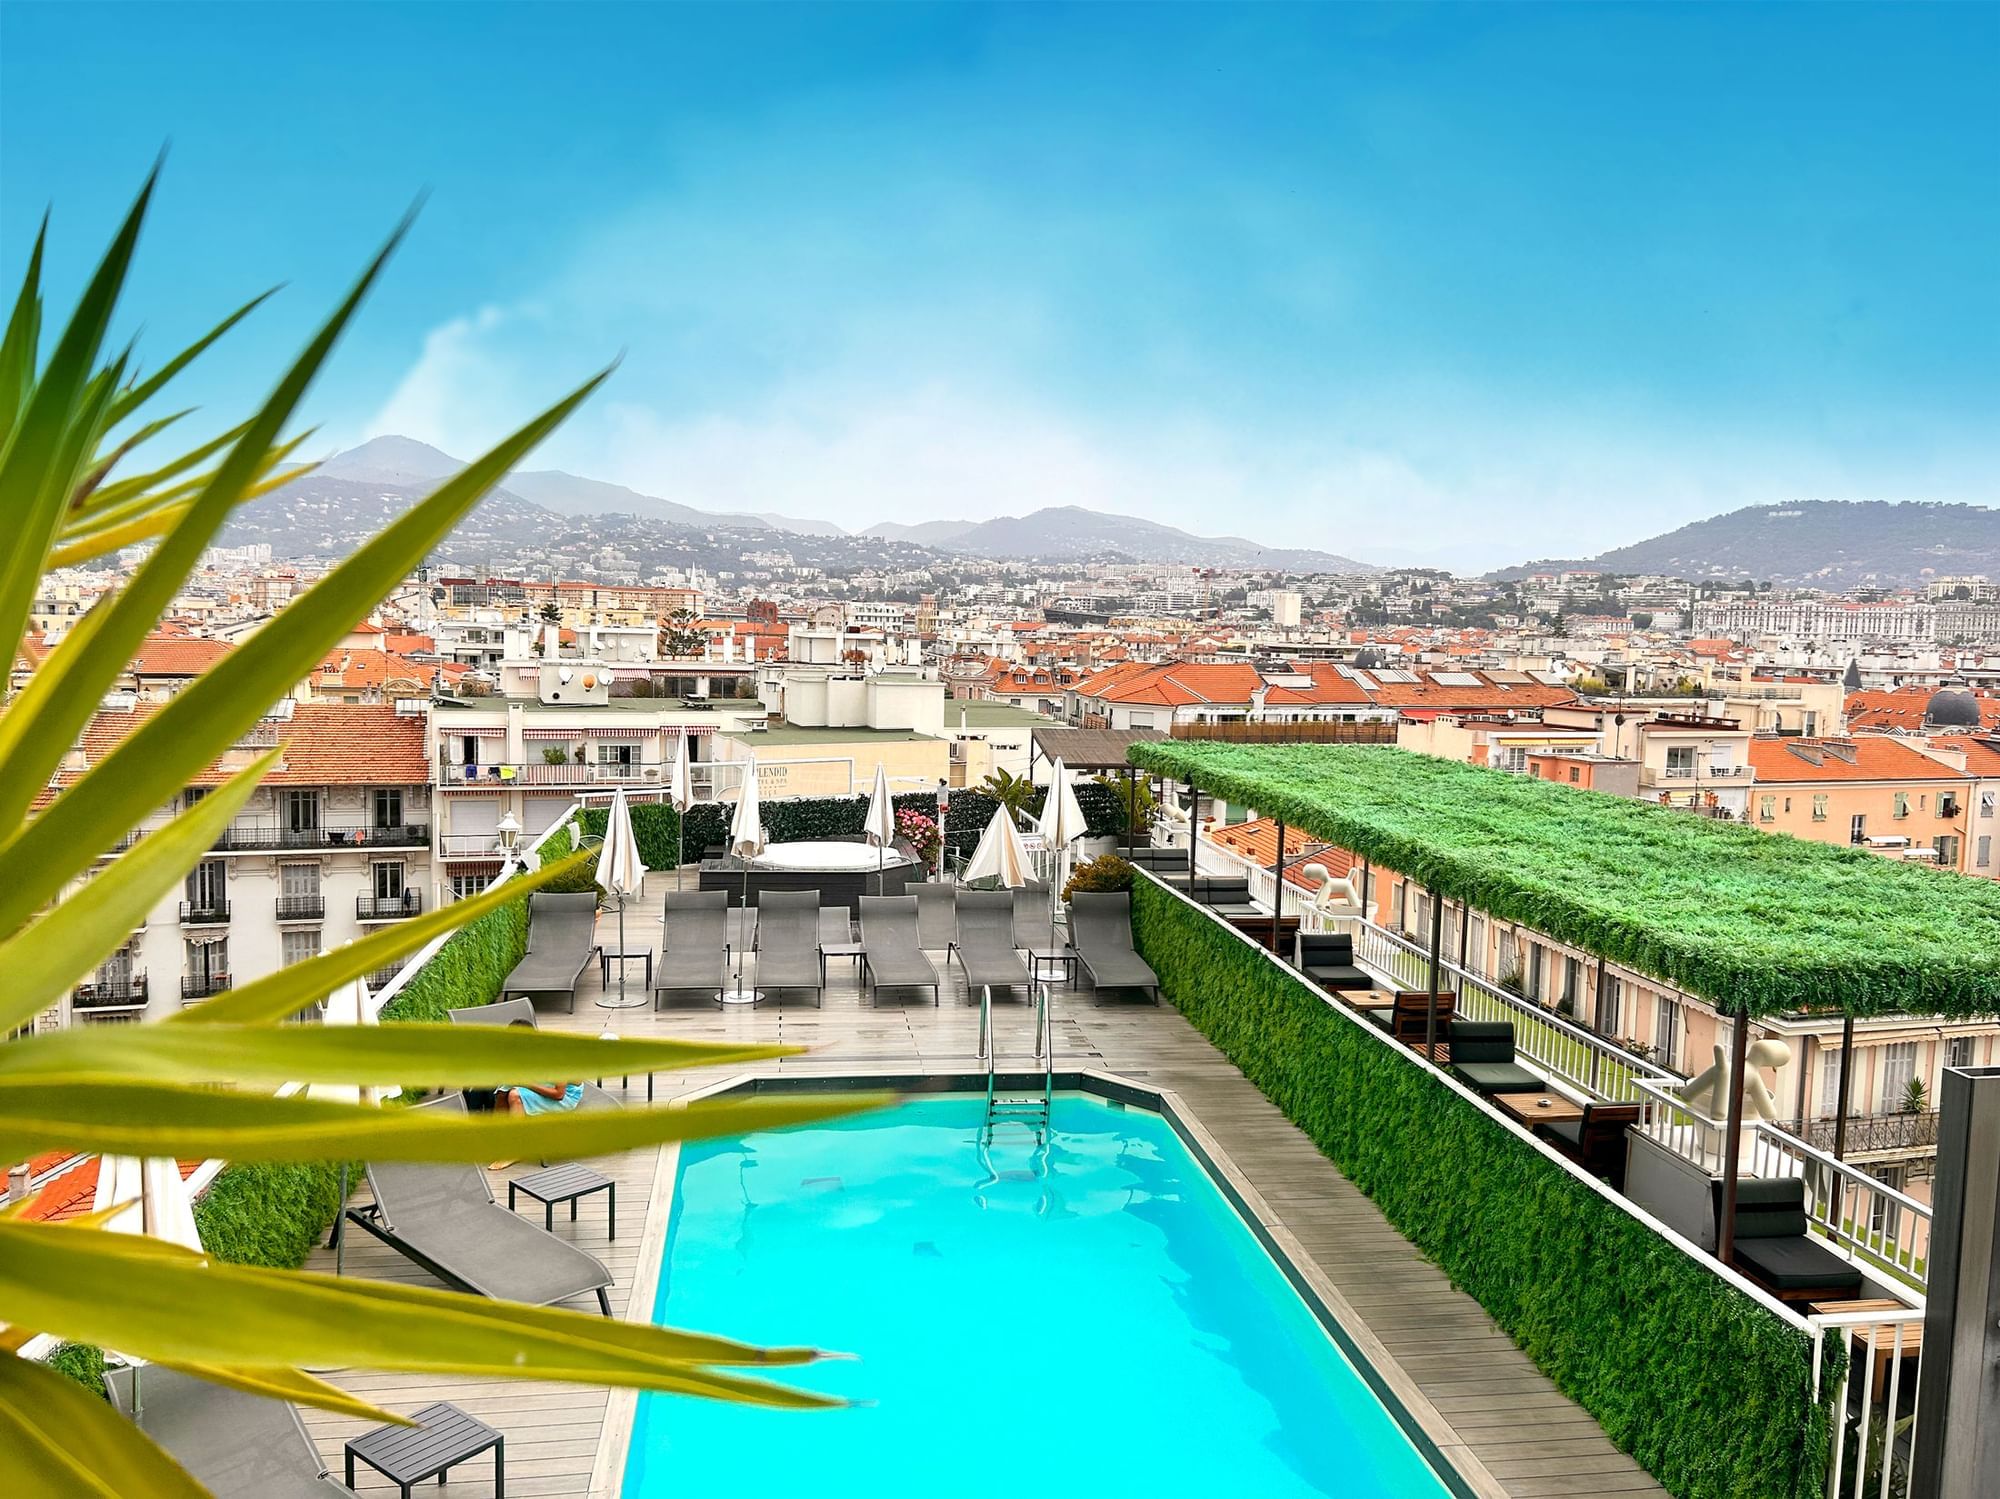 Outdoor pool, sun lounges, and dining area with city view at Splendid Hotel & Spa Nice